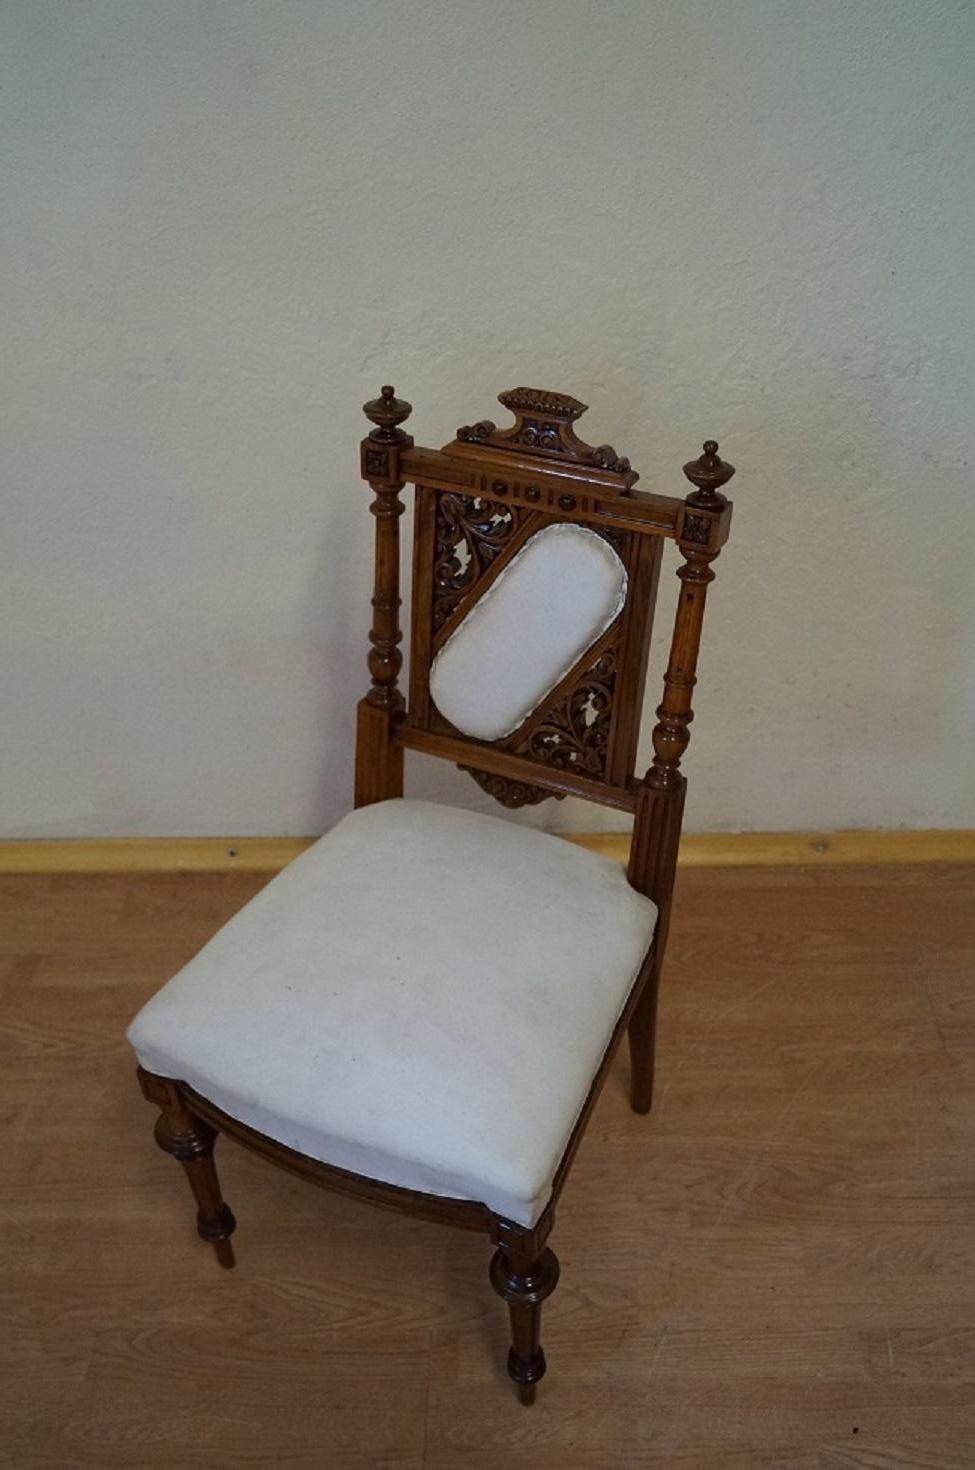 Eclectic walnut chair from 1880 from Cracow (Poland)
Every piece of furniture that leaves our workshop from the beginning to the end is subjected to manual renovation, so as to restore its original condition from many years ago (It has been cleaned